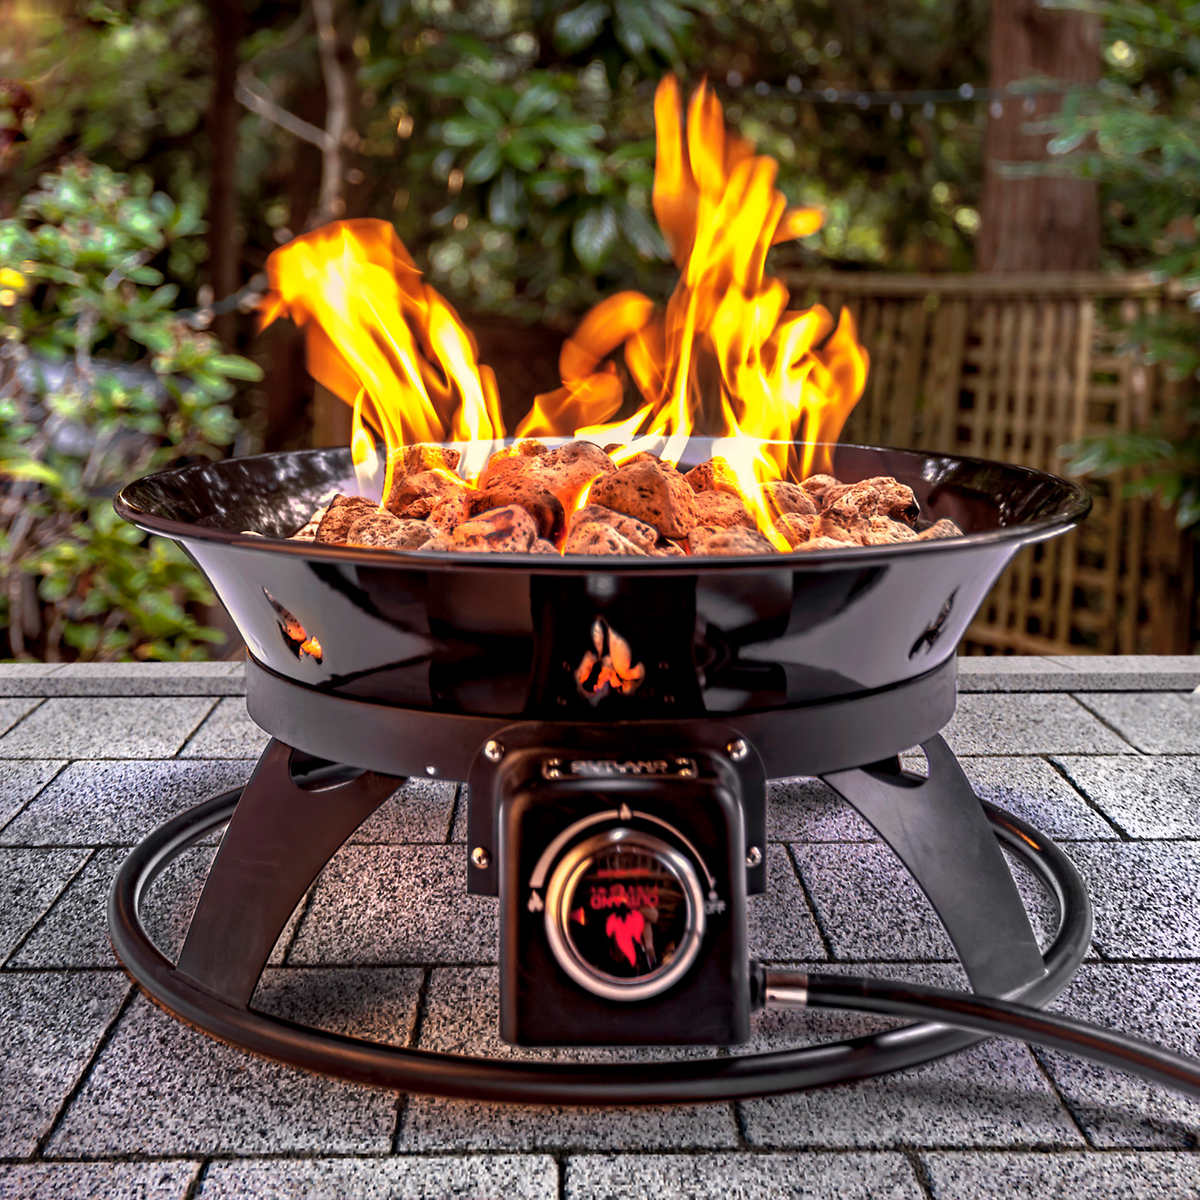 Outland Firebowl Outdoor Firepit Costco, Cooking On A Propane Fire Pit